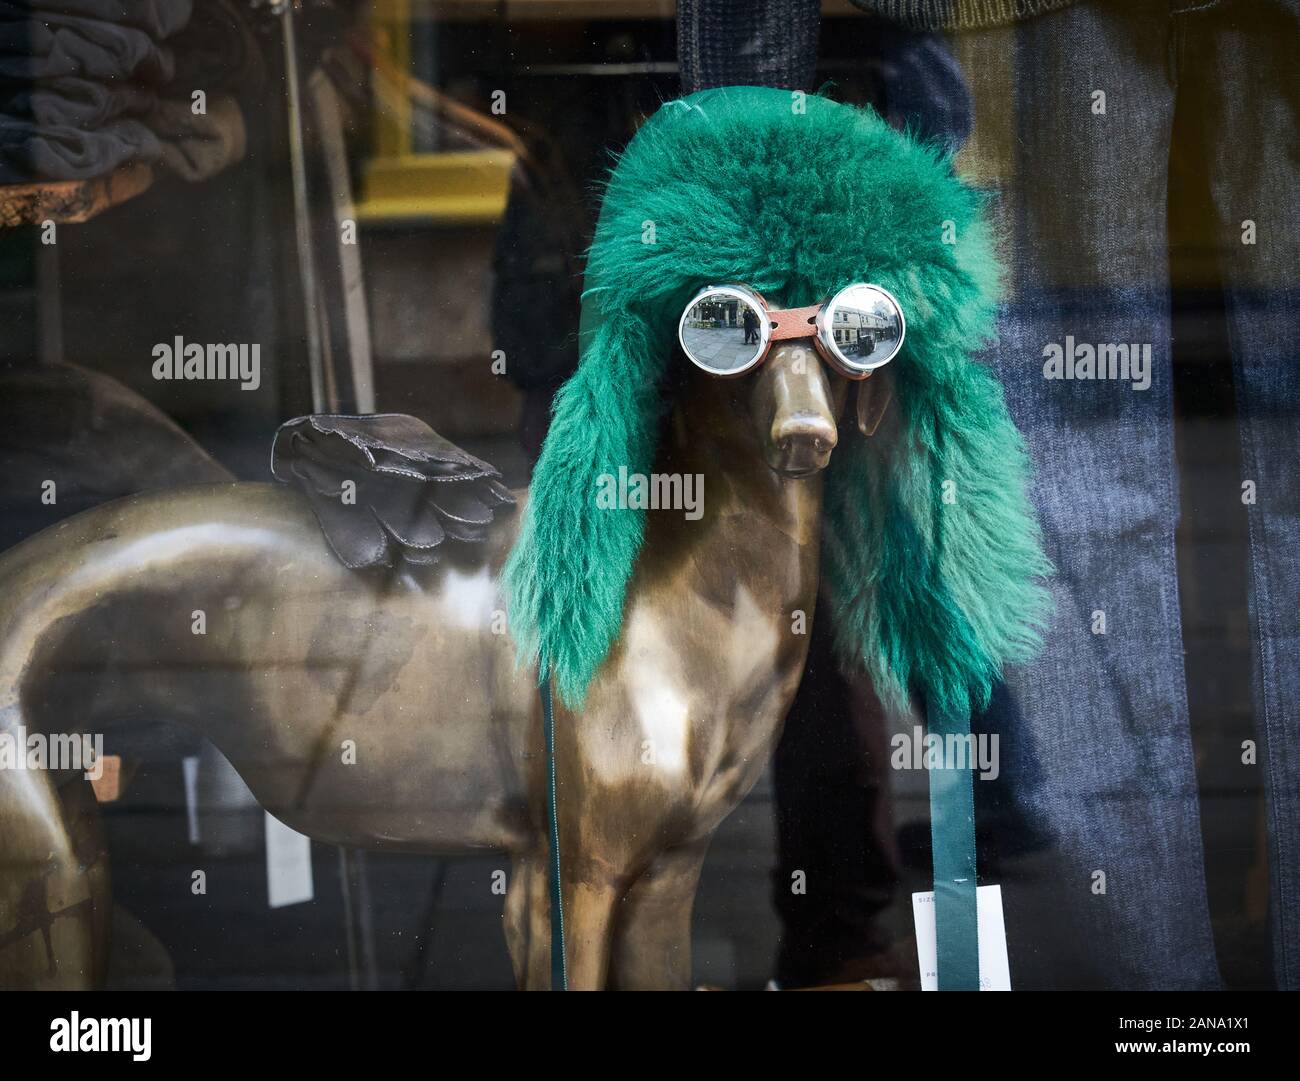 Bronze greyhound dog wearing snow goggles and a green fur hat in a shop window in Bath Somerset UK Stock Photo